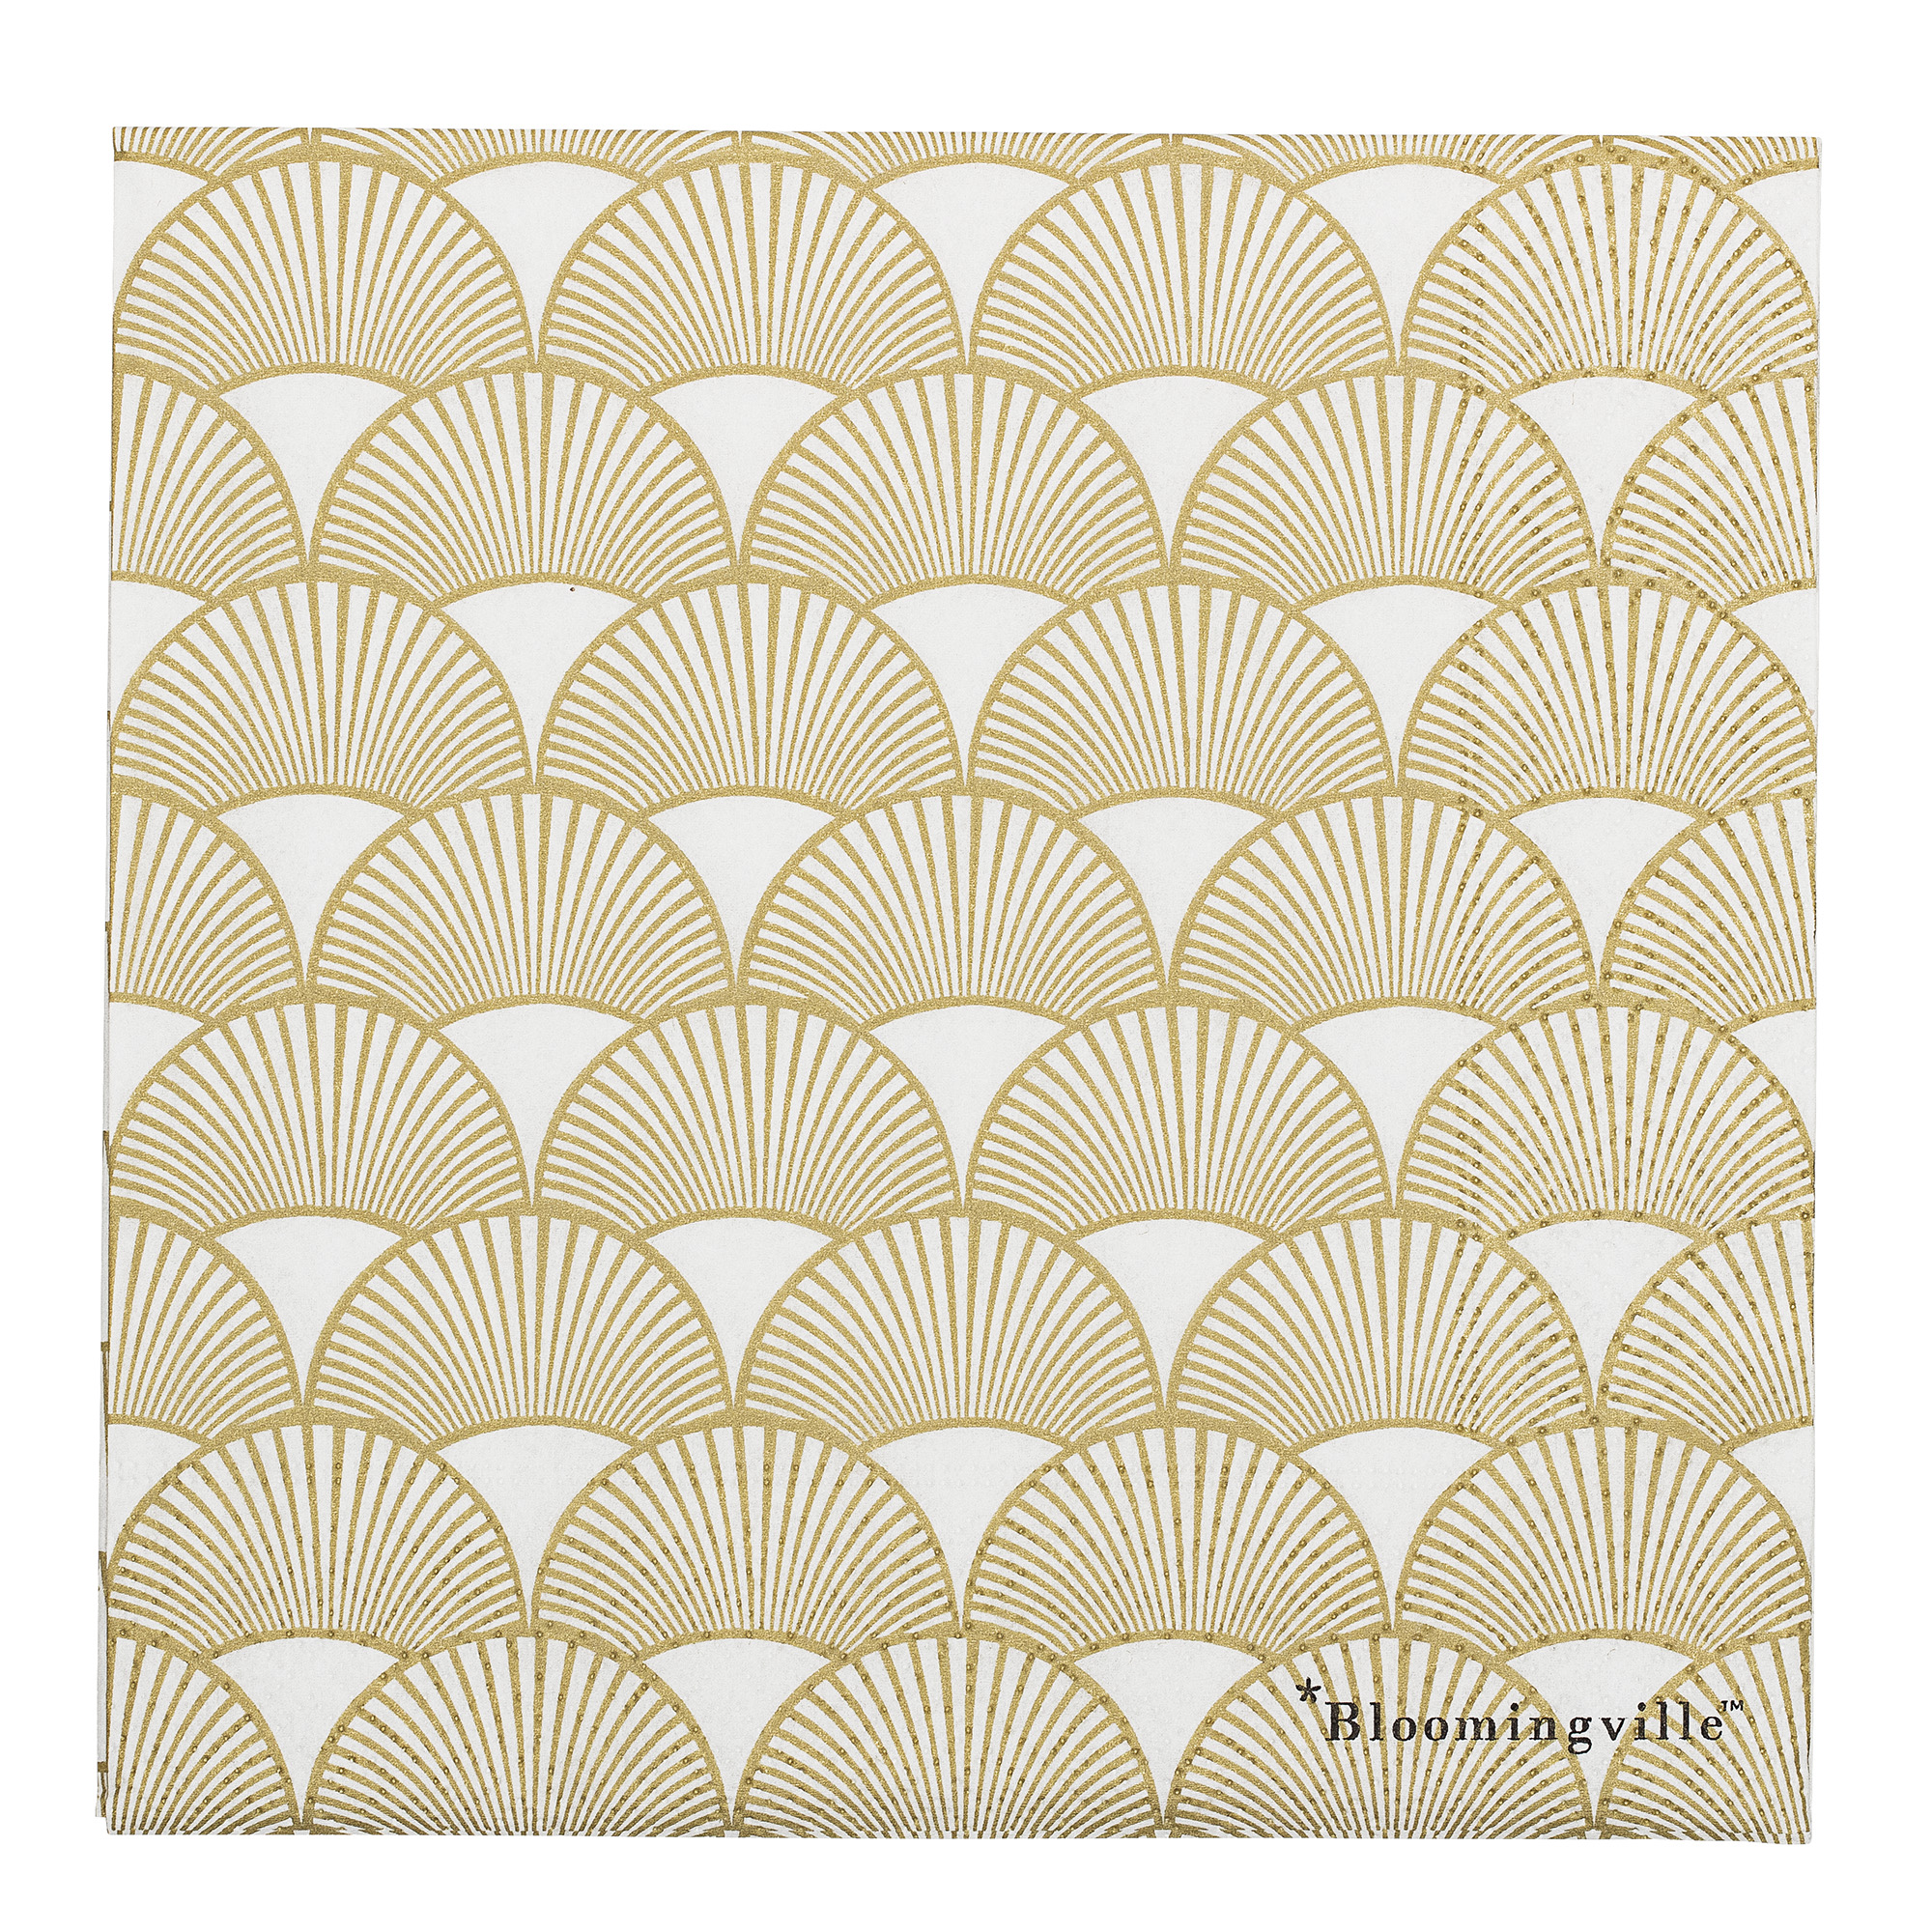 Bloomingville Pack of 20 White with Golden Arches Paper Napkin